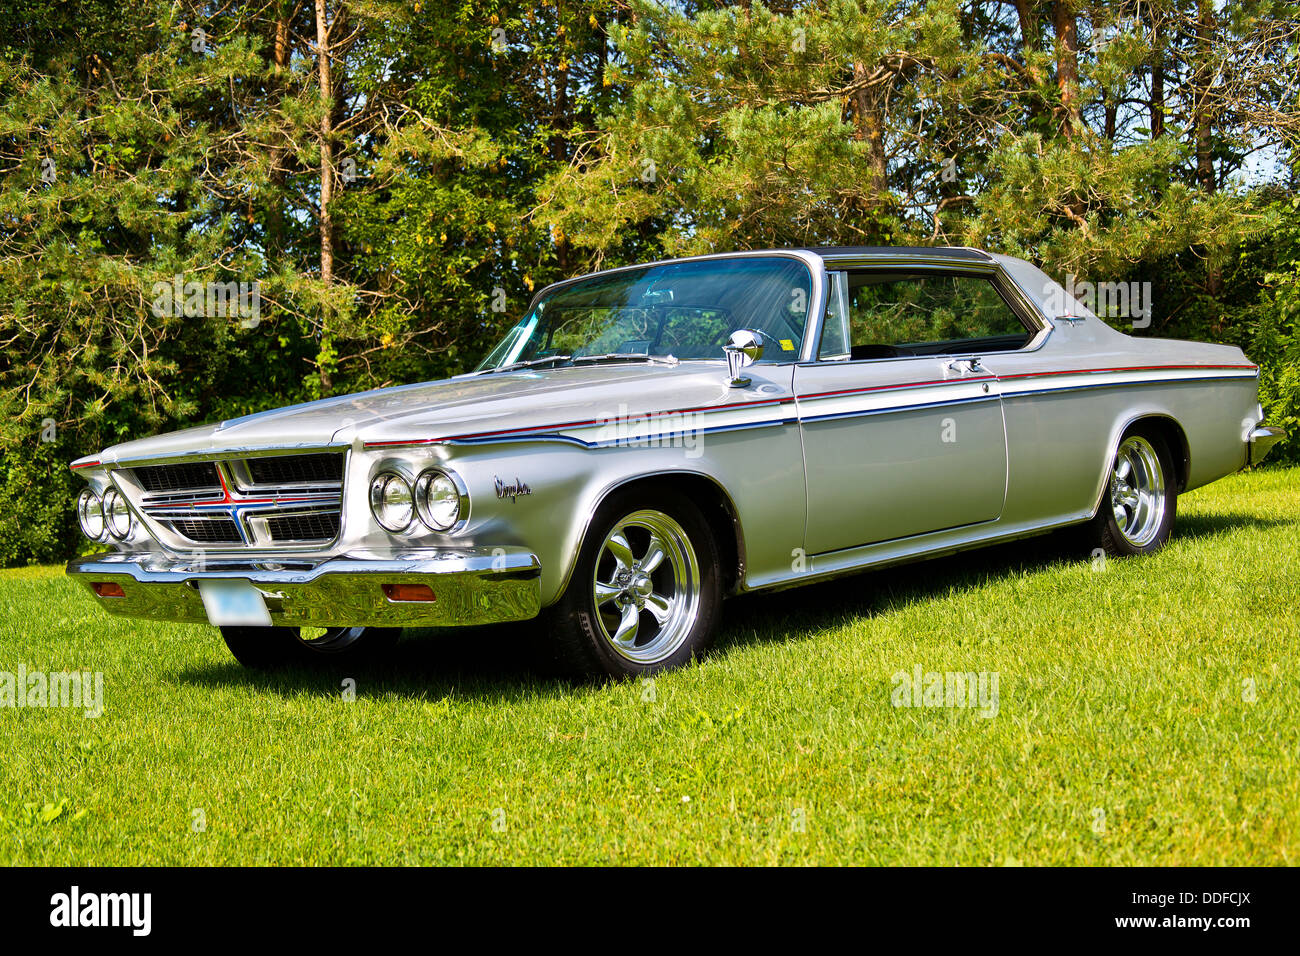 1964 Chrysler 300 Silver Edition Banque D'Images